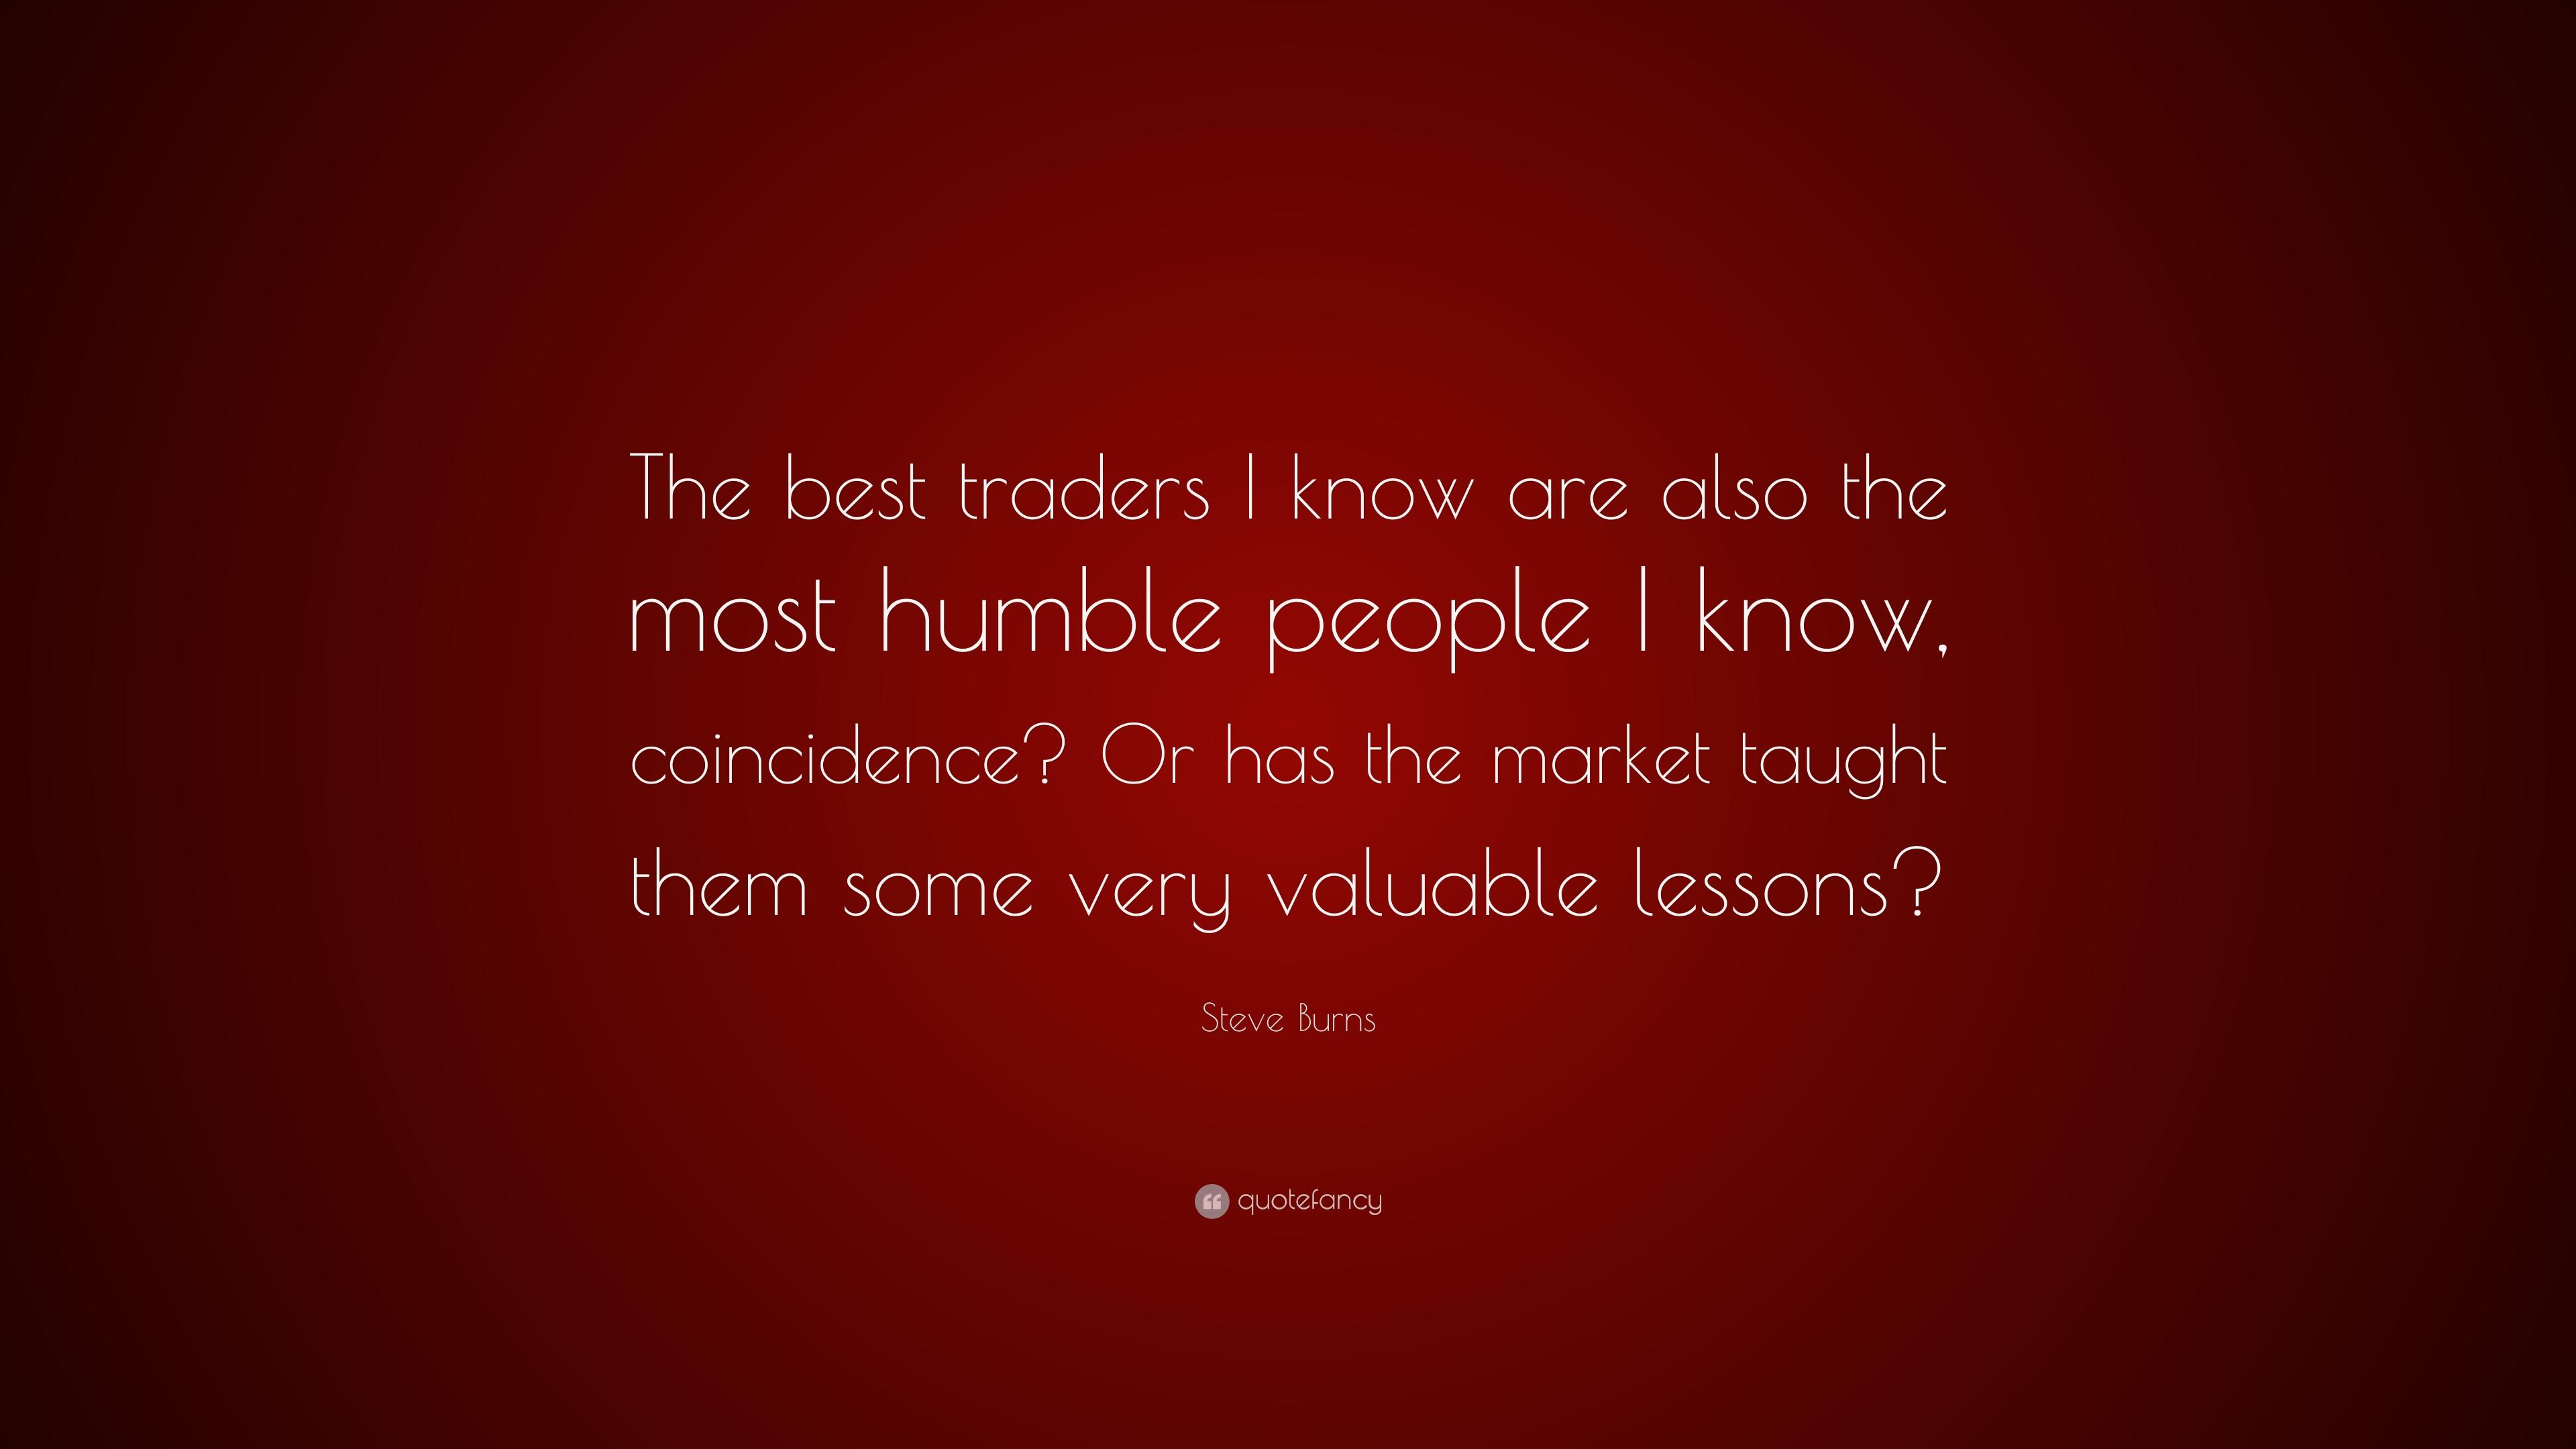 Steve Burns Quote: “The best traders I know are also